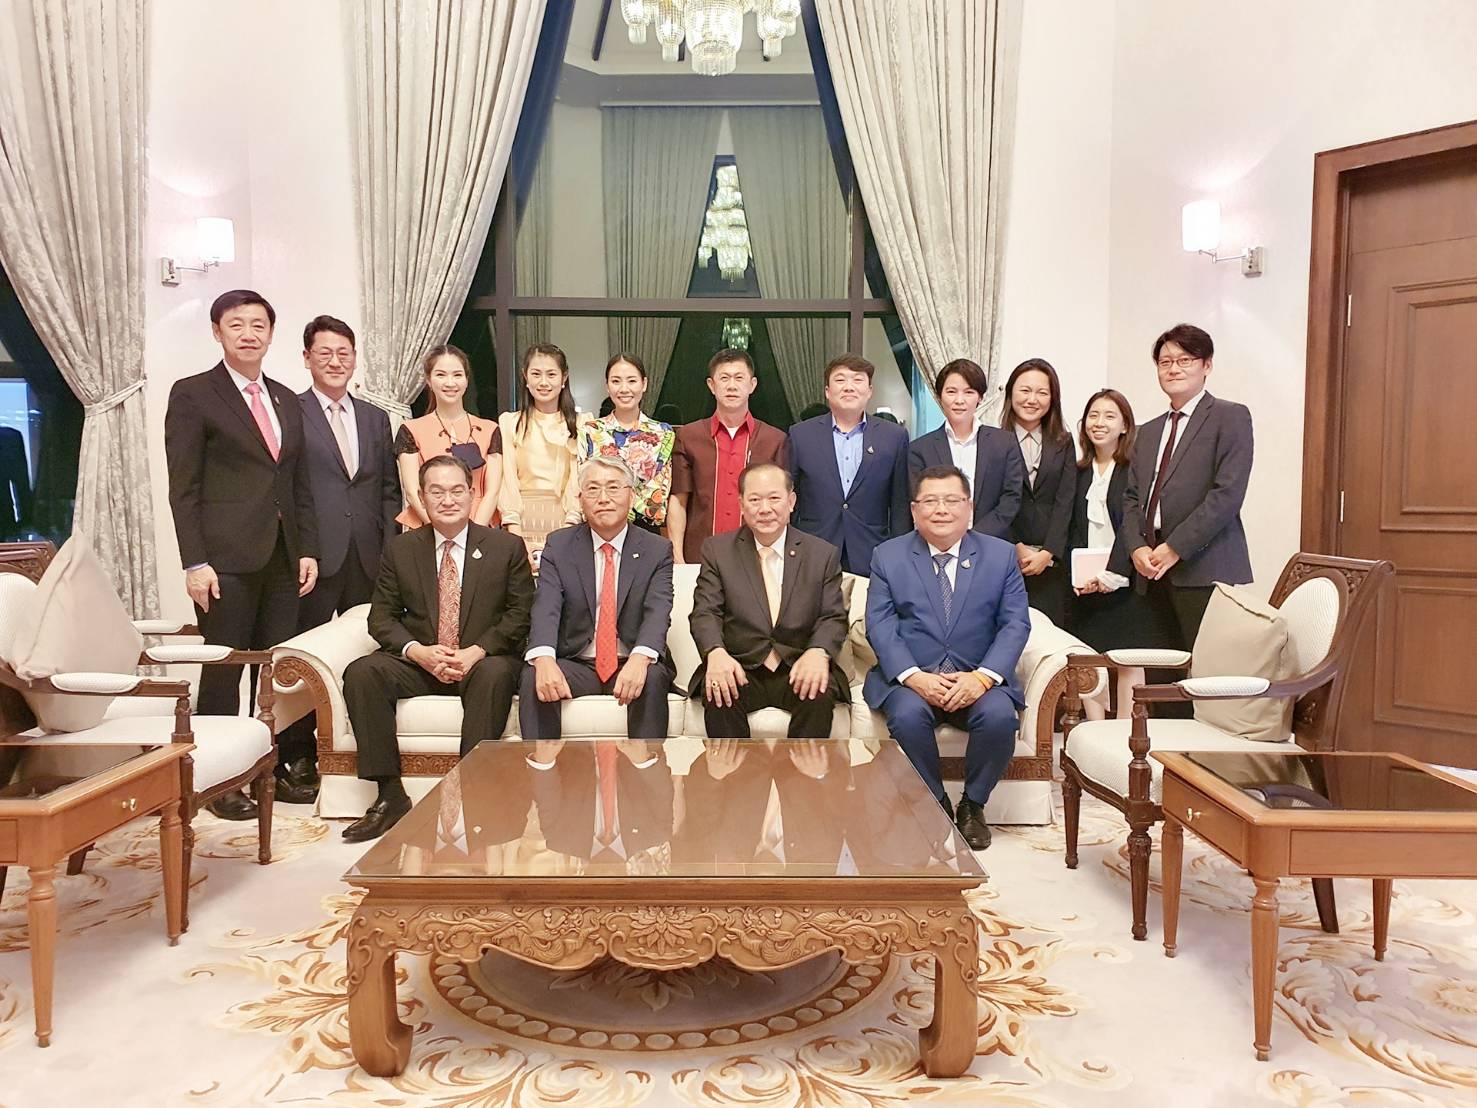 1 October 2020, at the Residence of the Ambassador of the Republic of Korea to Thailand, Bangkok